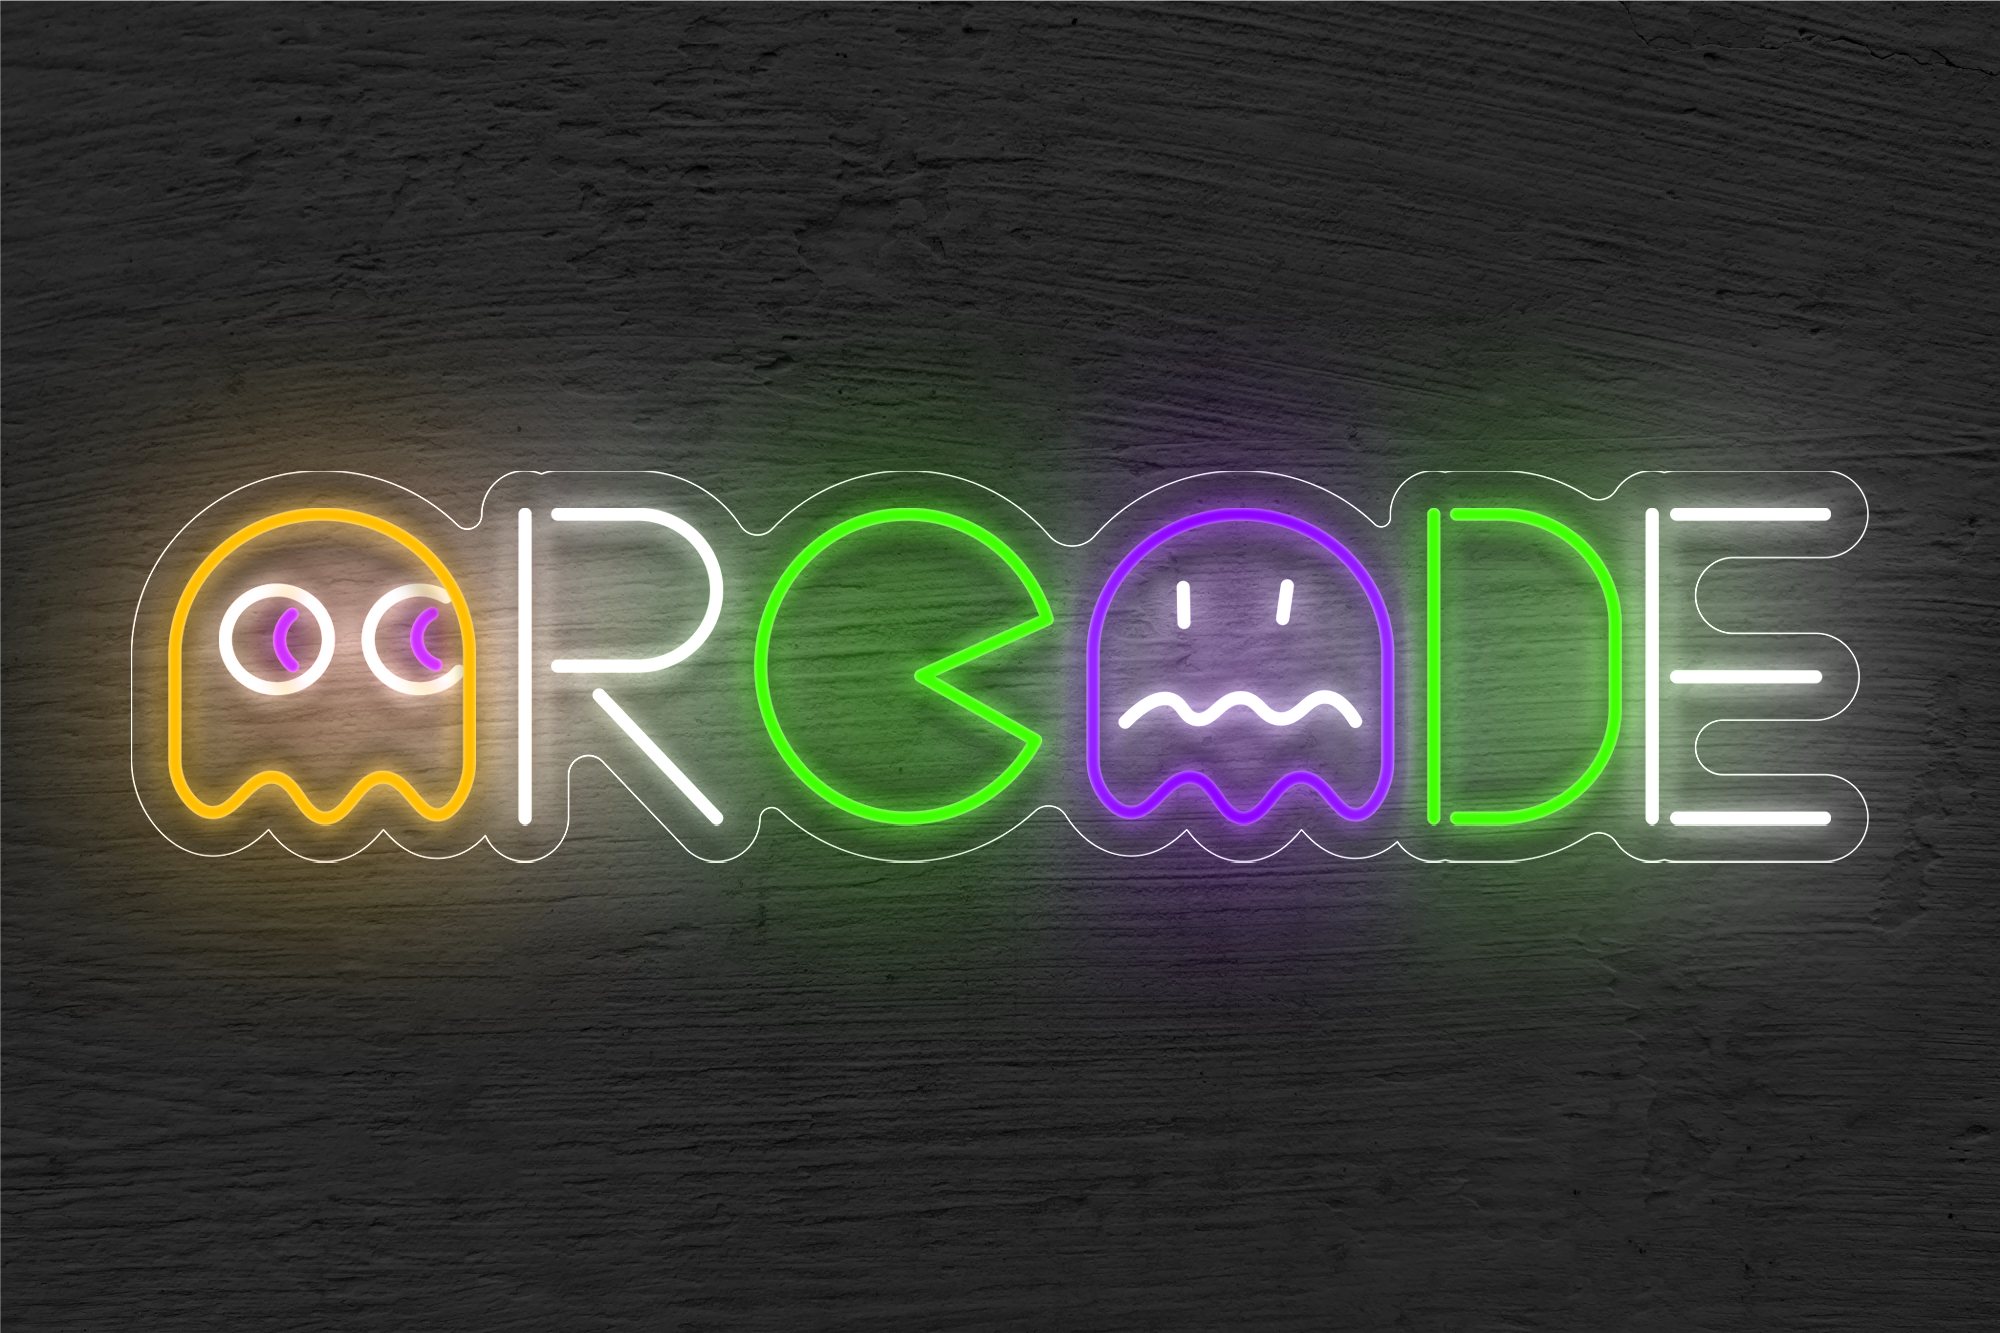 "Arcade" and Pacman LED Neon Sign